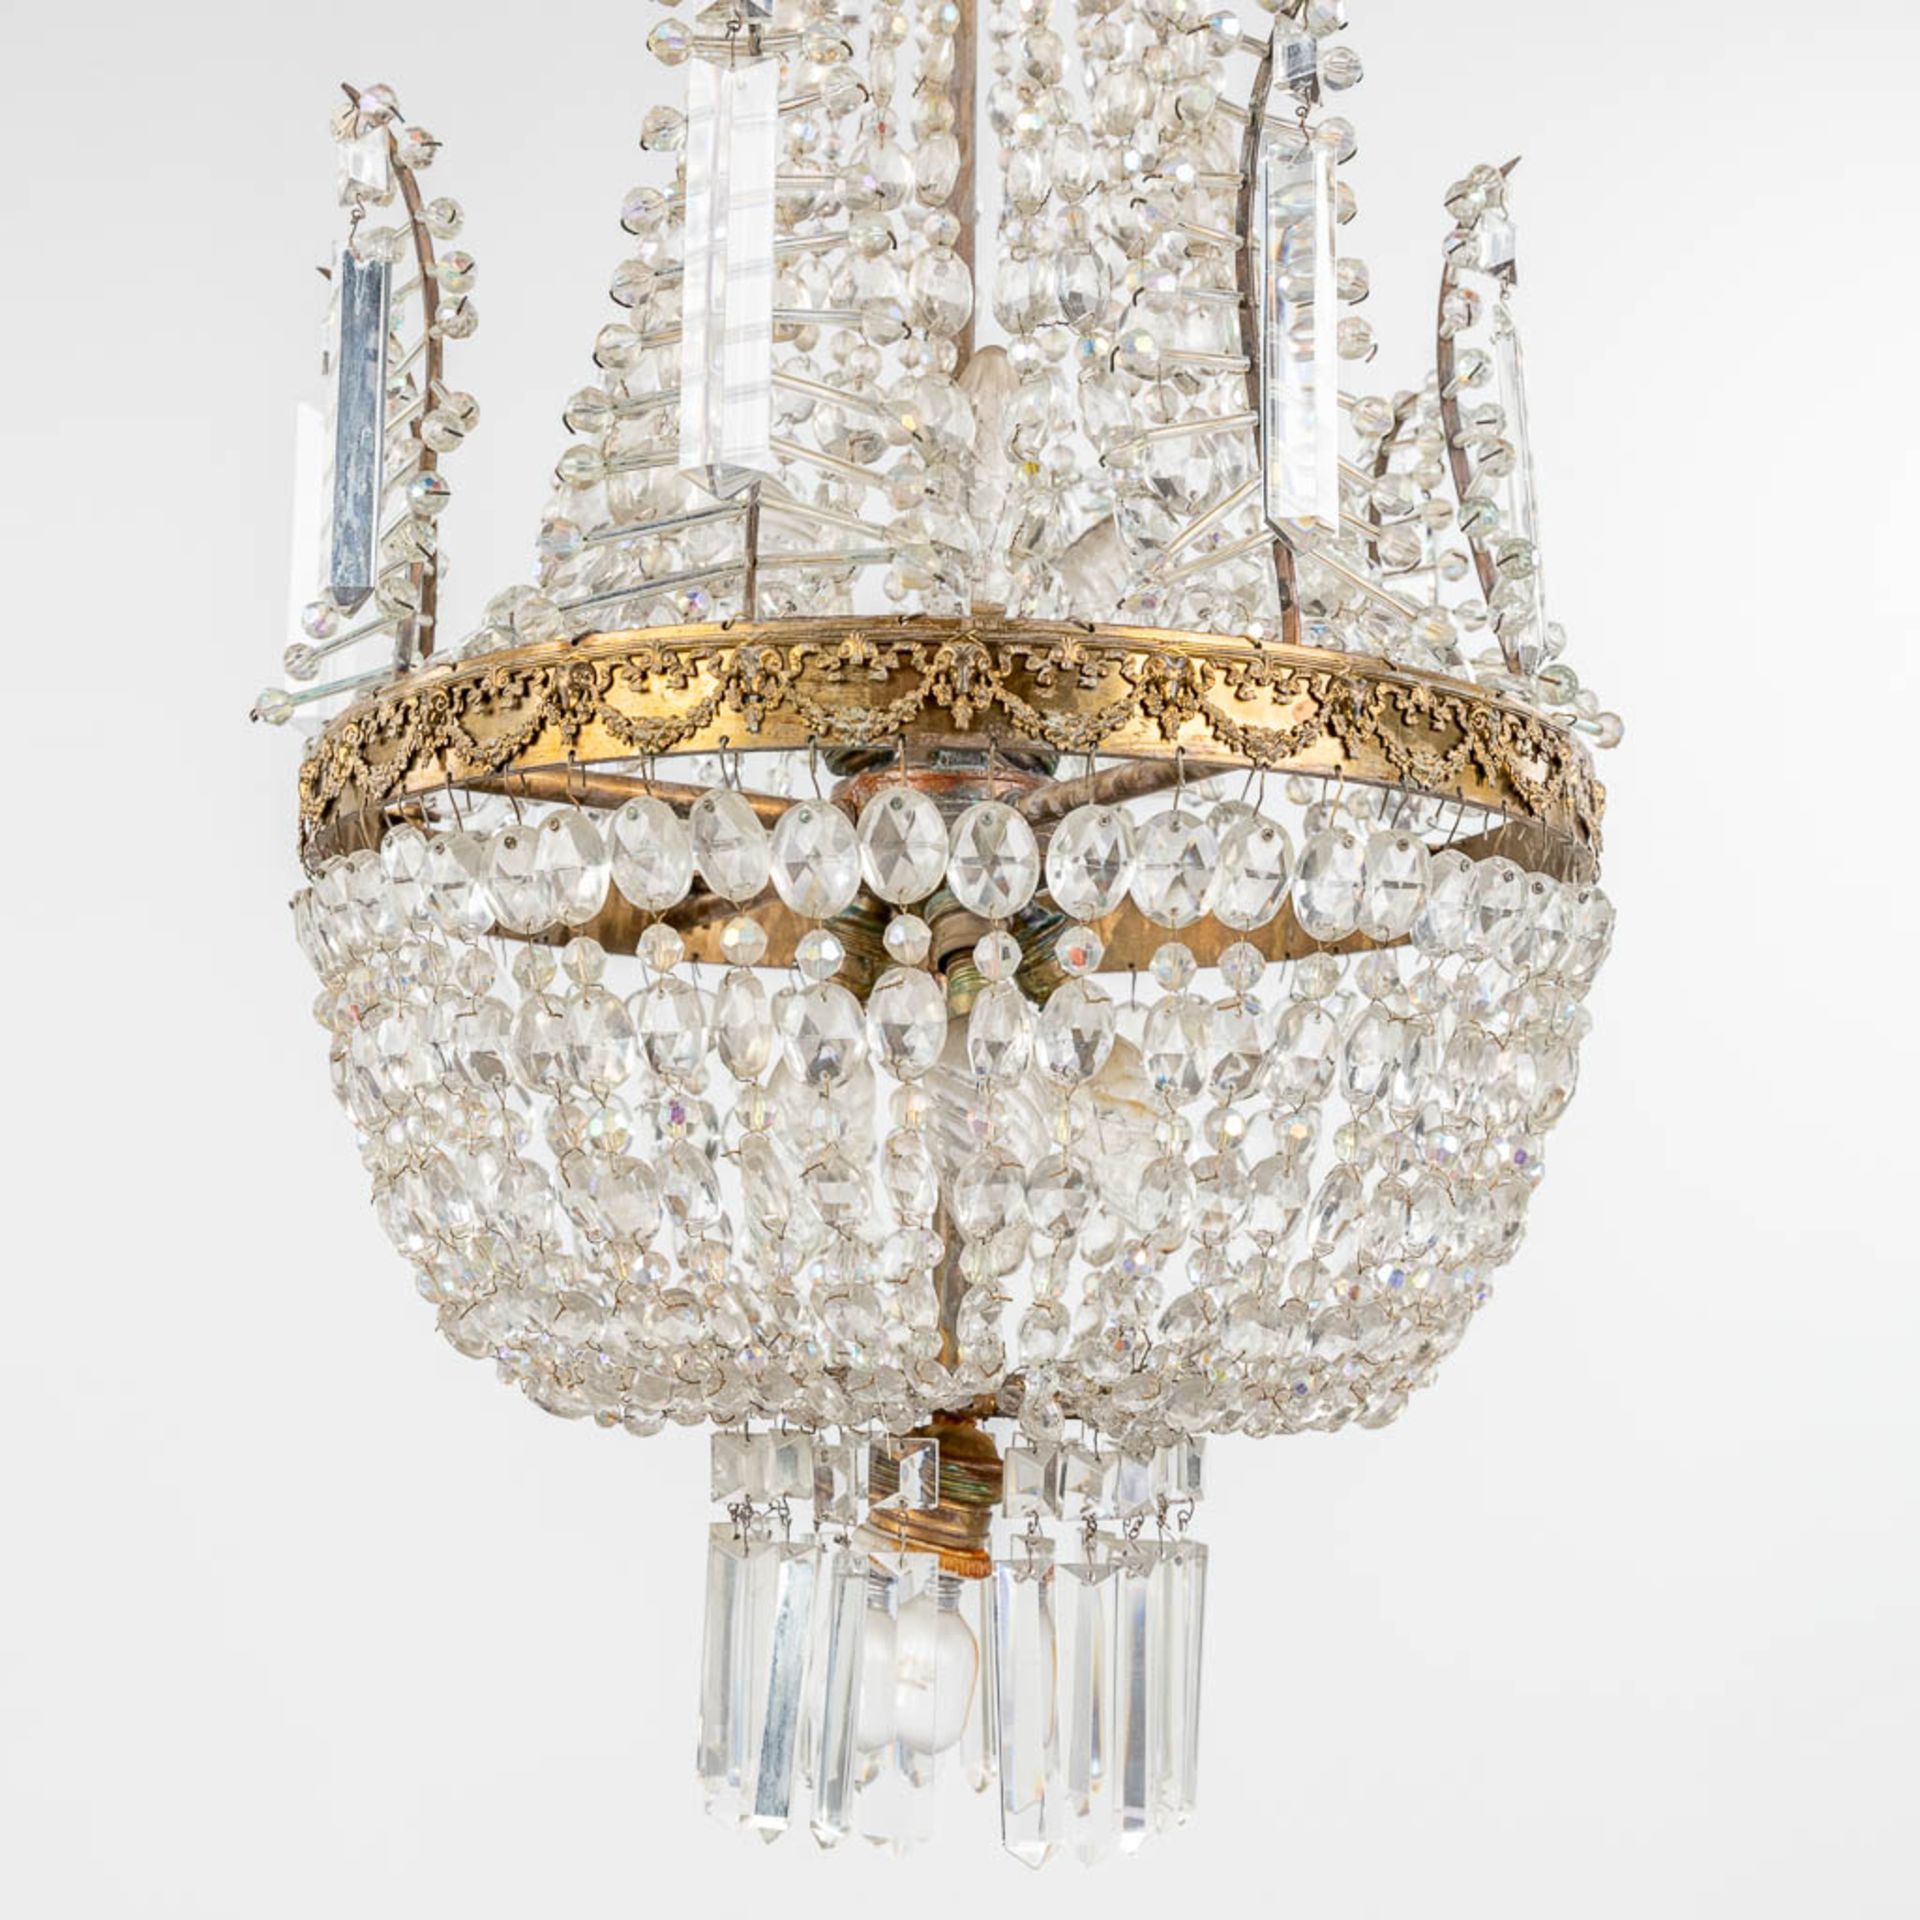 A chandelier 'Sac A Perles' decorated with tiny ram's heads. 20th century. (H: 83 x D: 42 cm) - Bild 3 aus 10